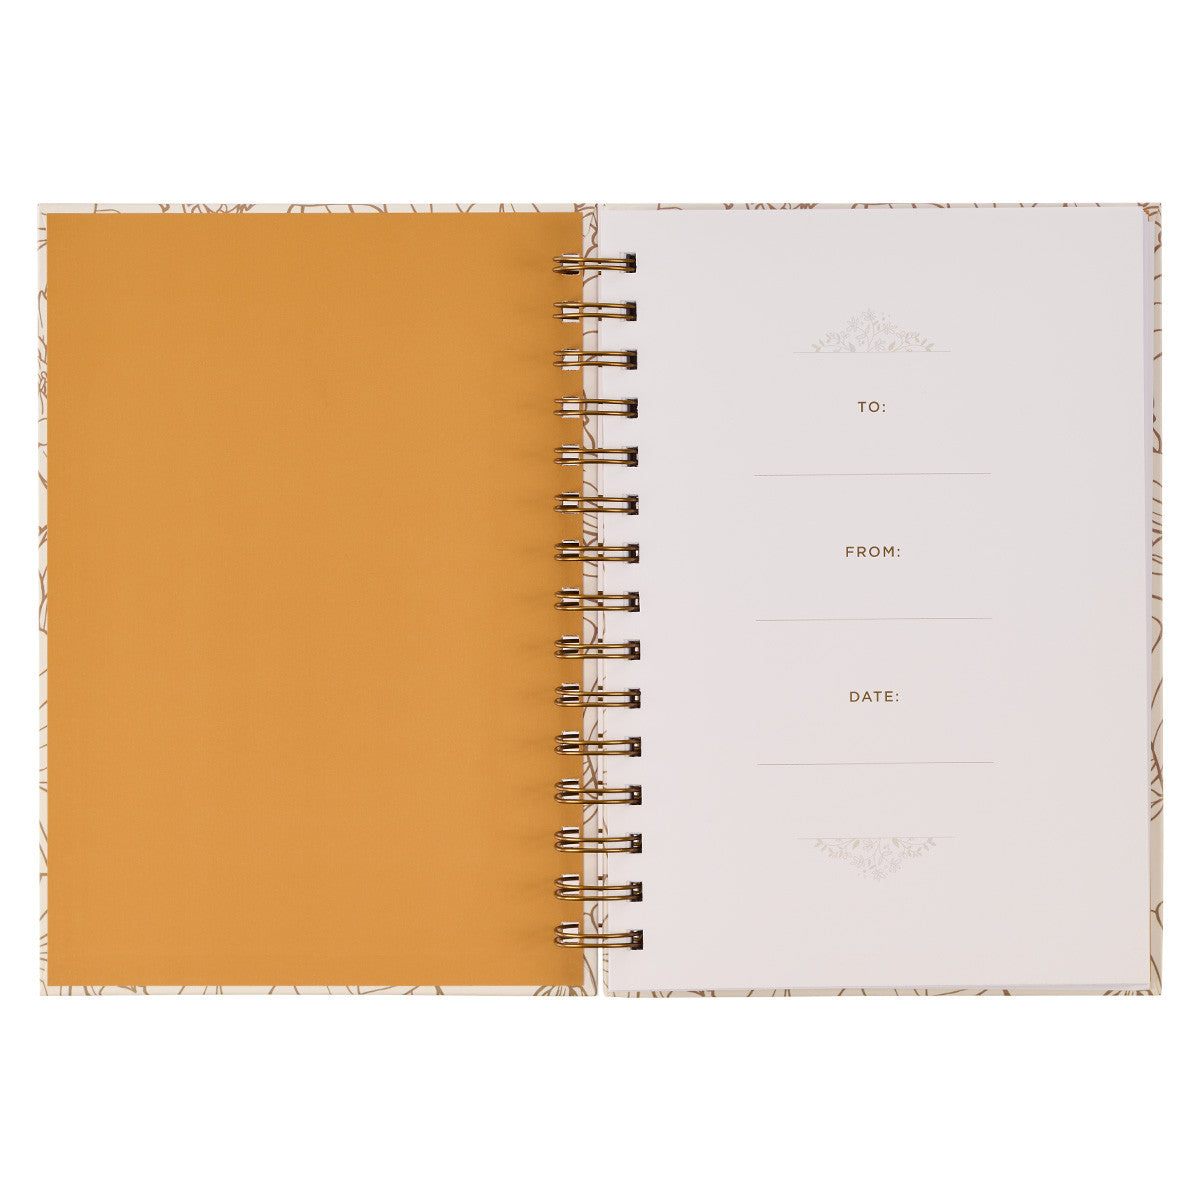 Give Thanks White and Gold Wirebound Journal - Psalm 106:1 - The Christian Gift Company